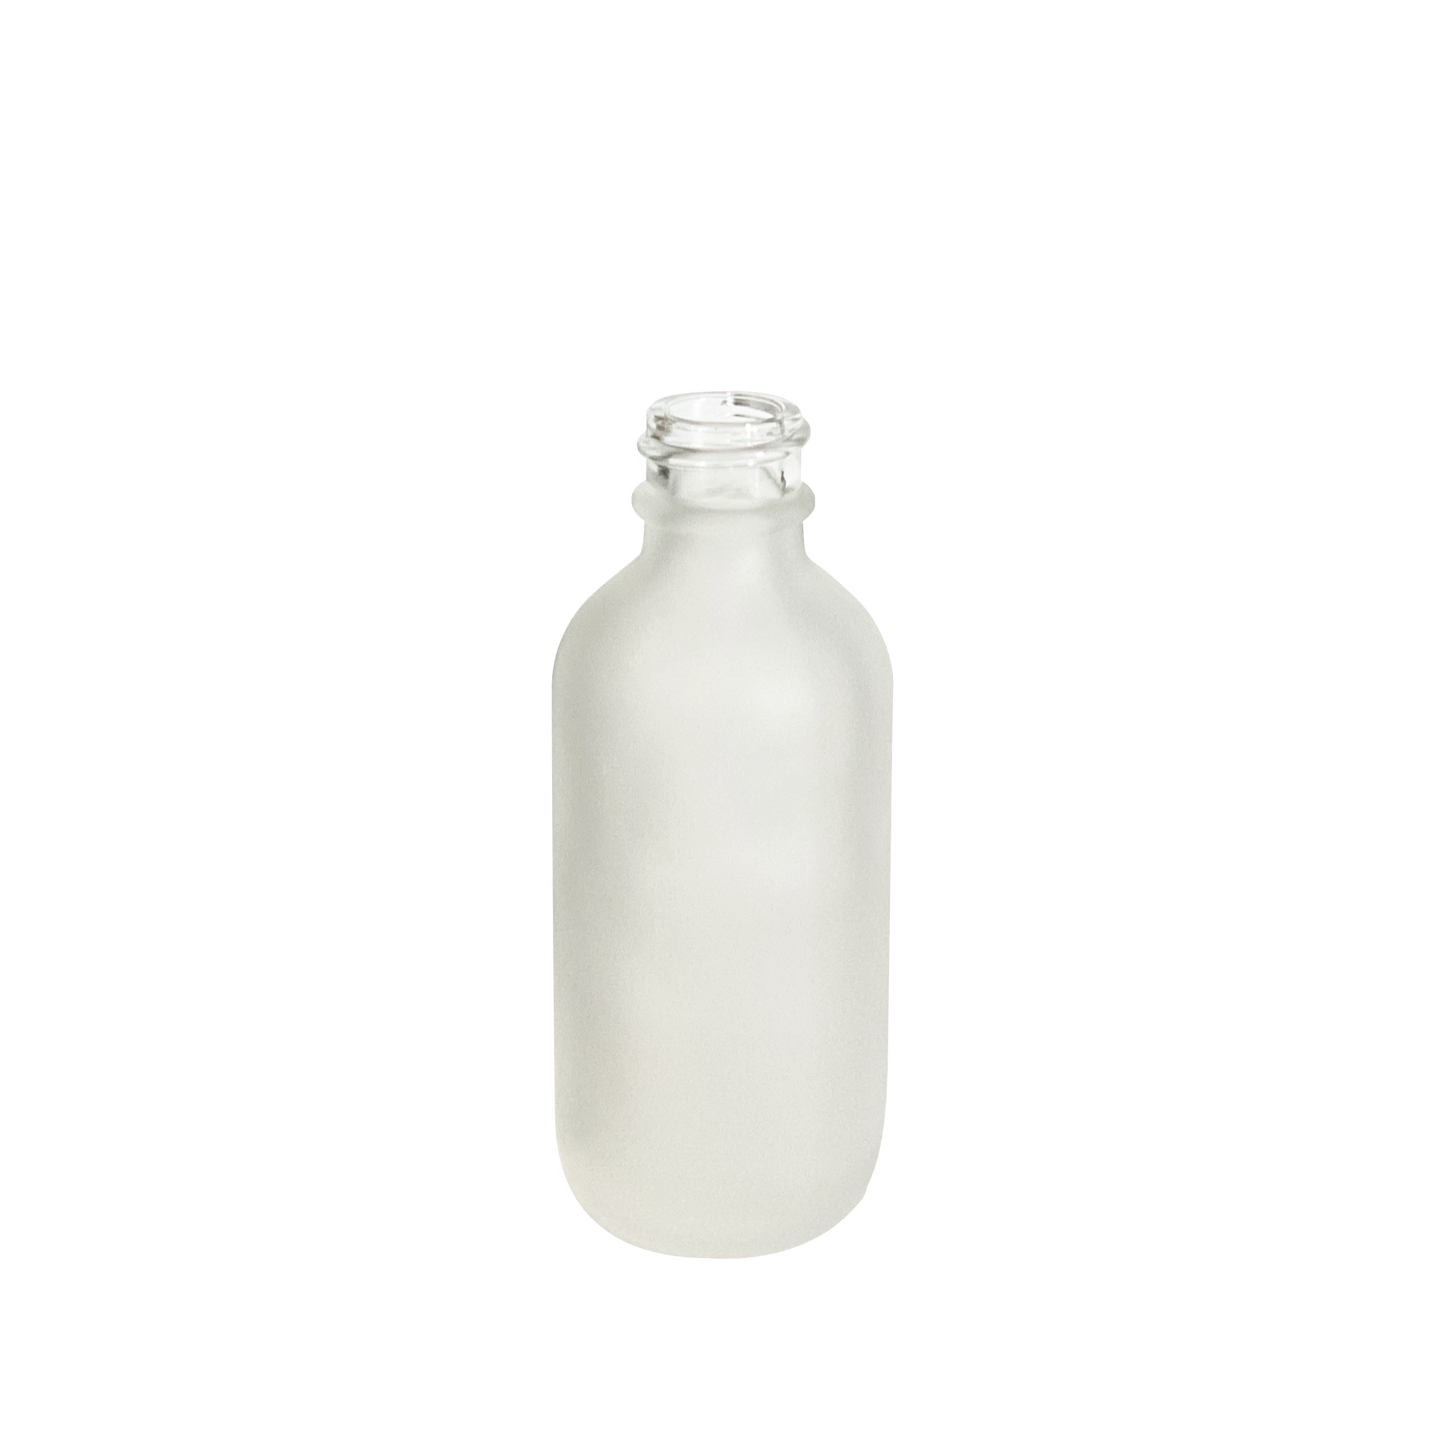 2 oz (60 ml) Frosted Clear Glass Boston Round 20-400 Bottle